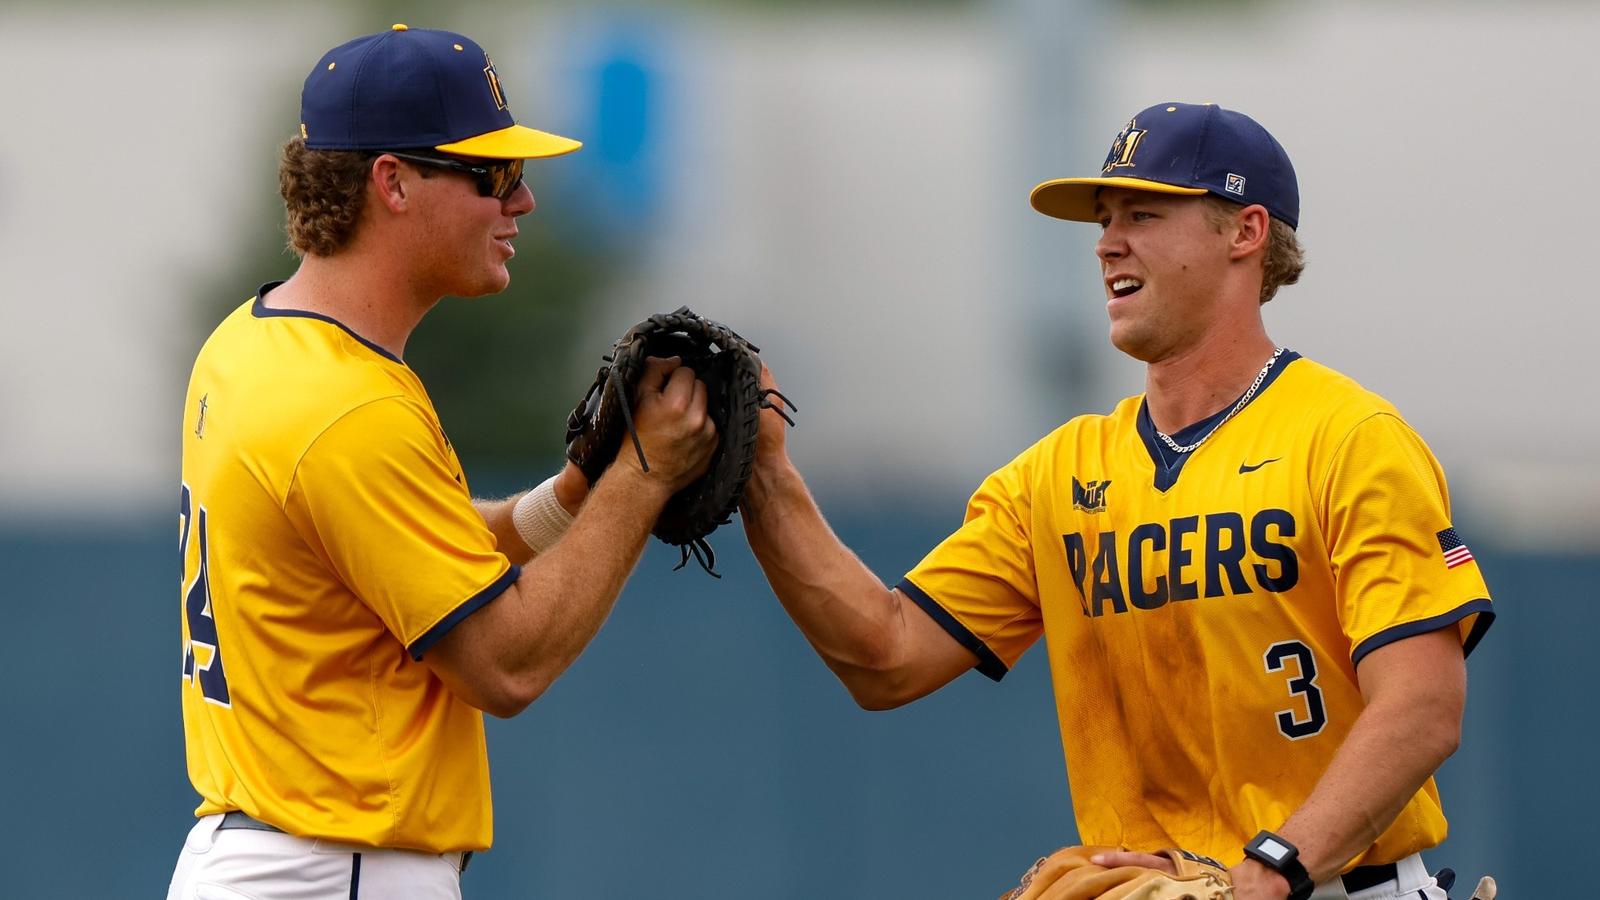 Murray State Racers Gear Up for Battling Ole Miss Rebels in Crucial SEC Midweek Clash